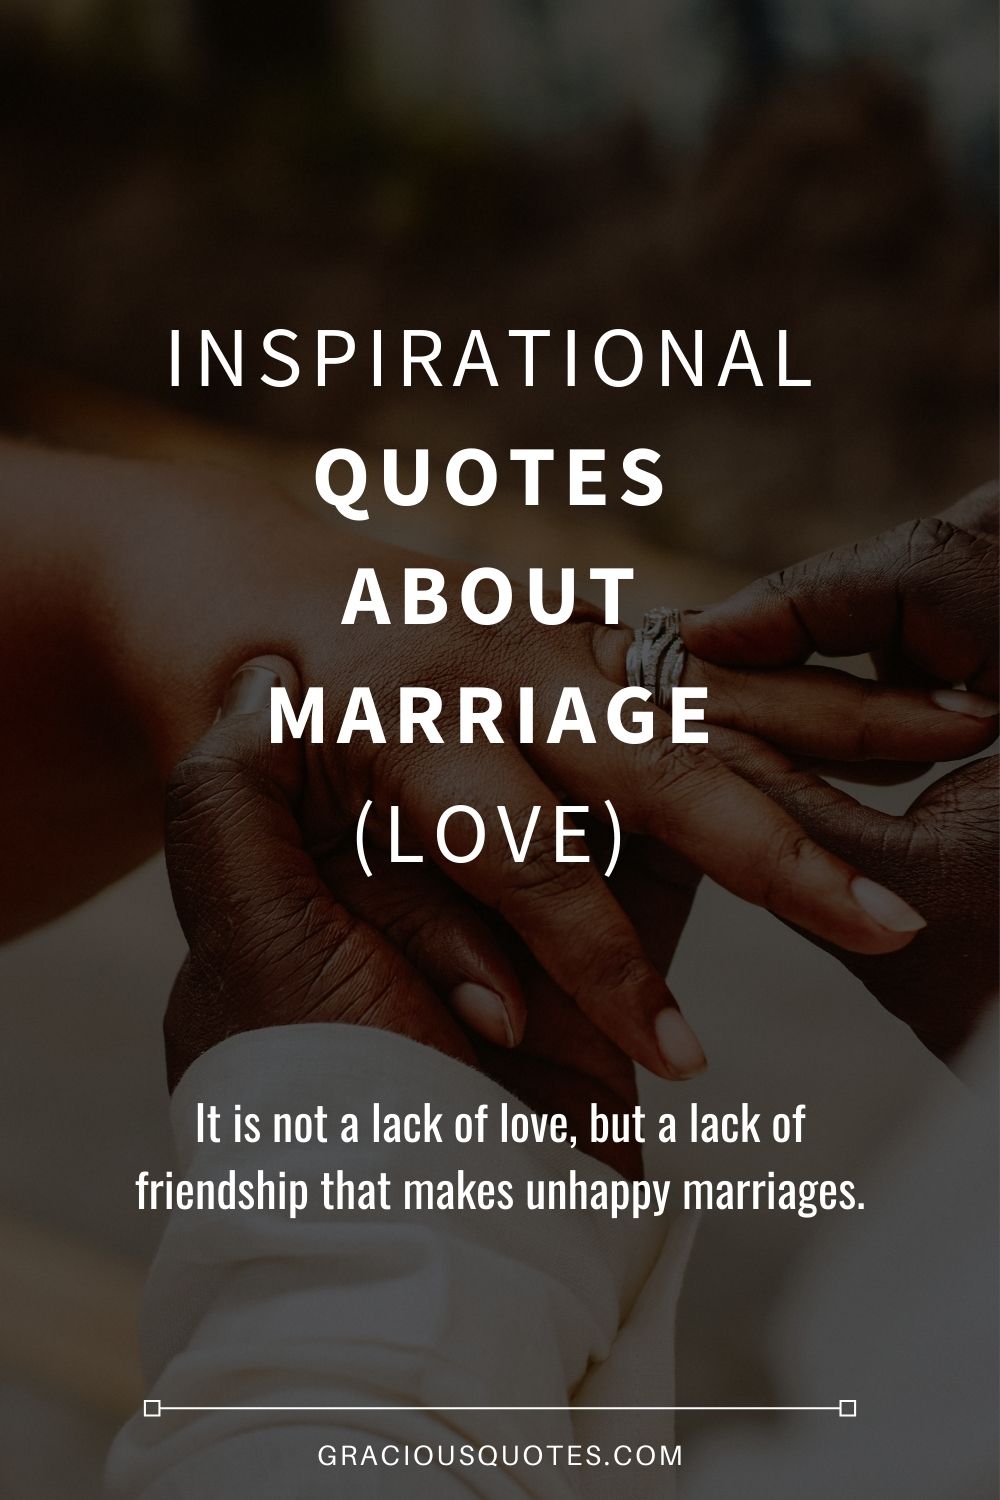 Inspirational Quotes About Marriage (LOVE) - Gracious Quotes